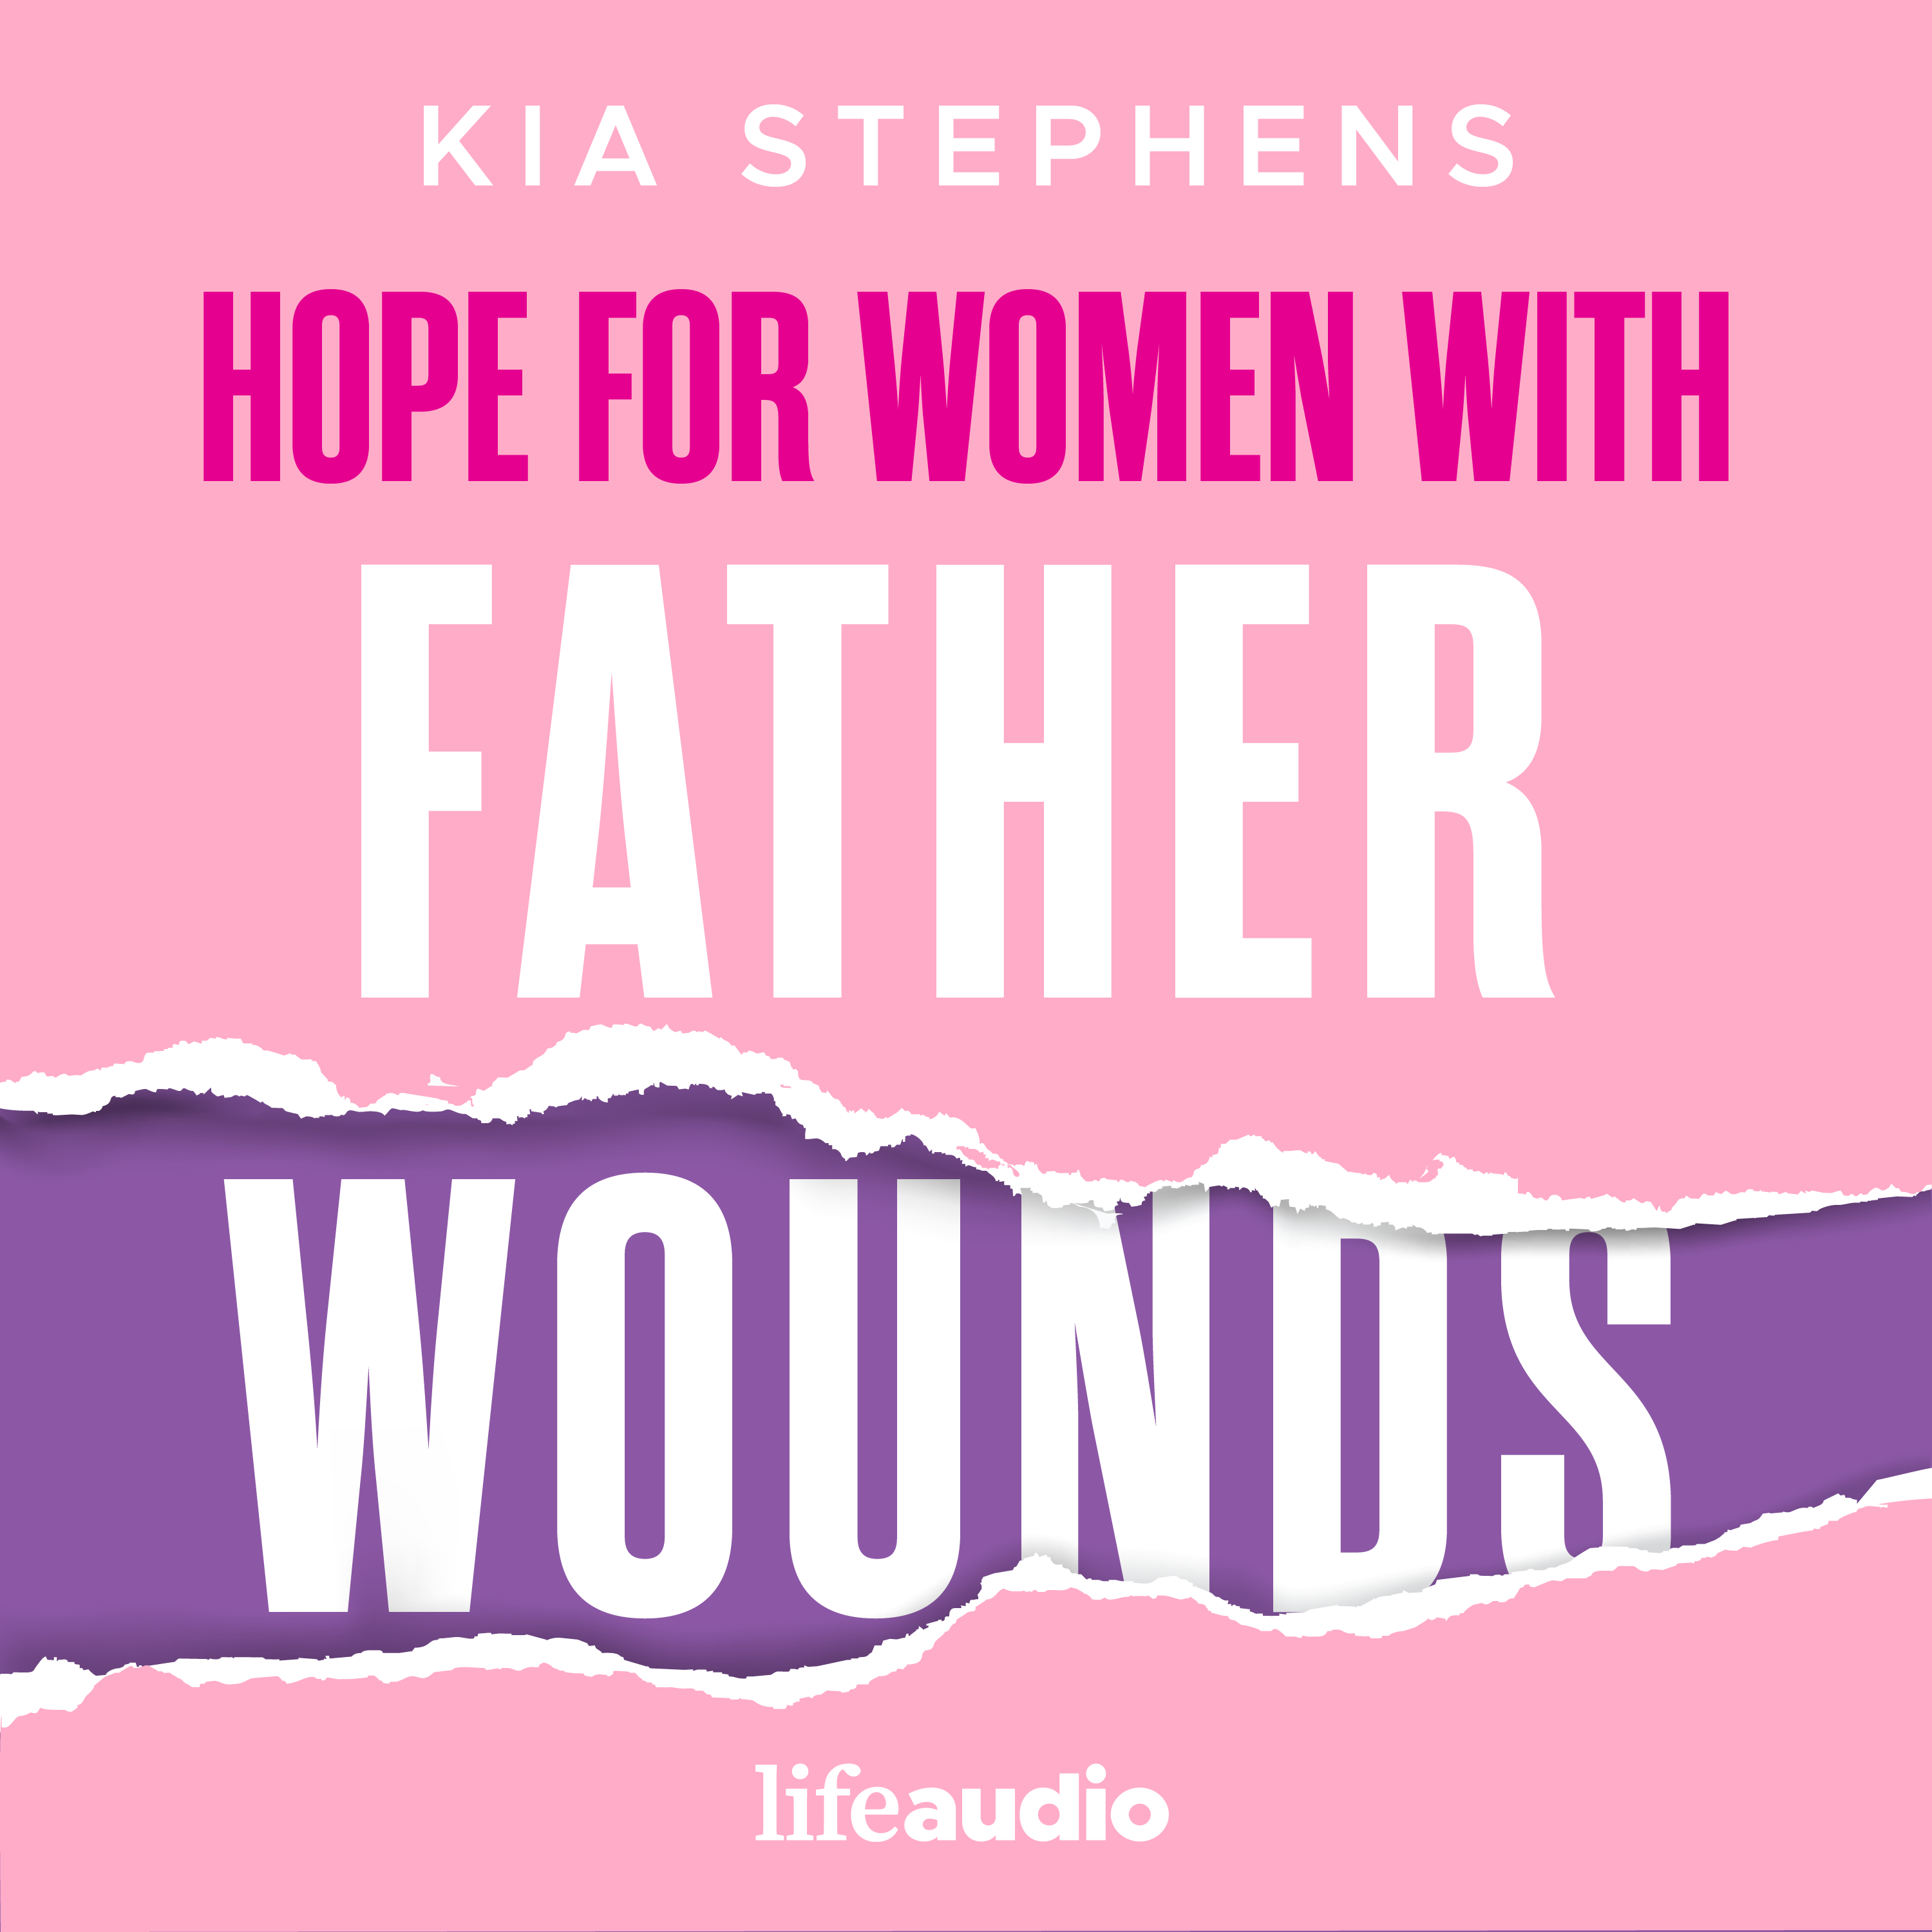 New Season Starts Today! For Women With Father Wounds